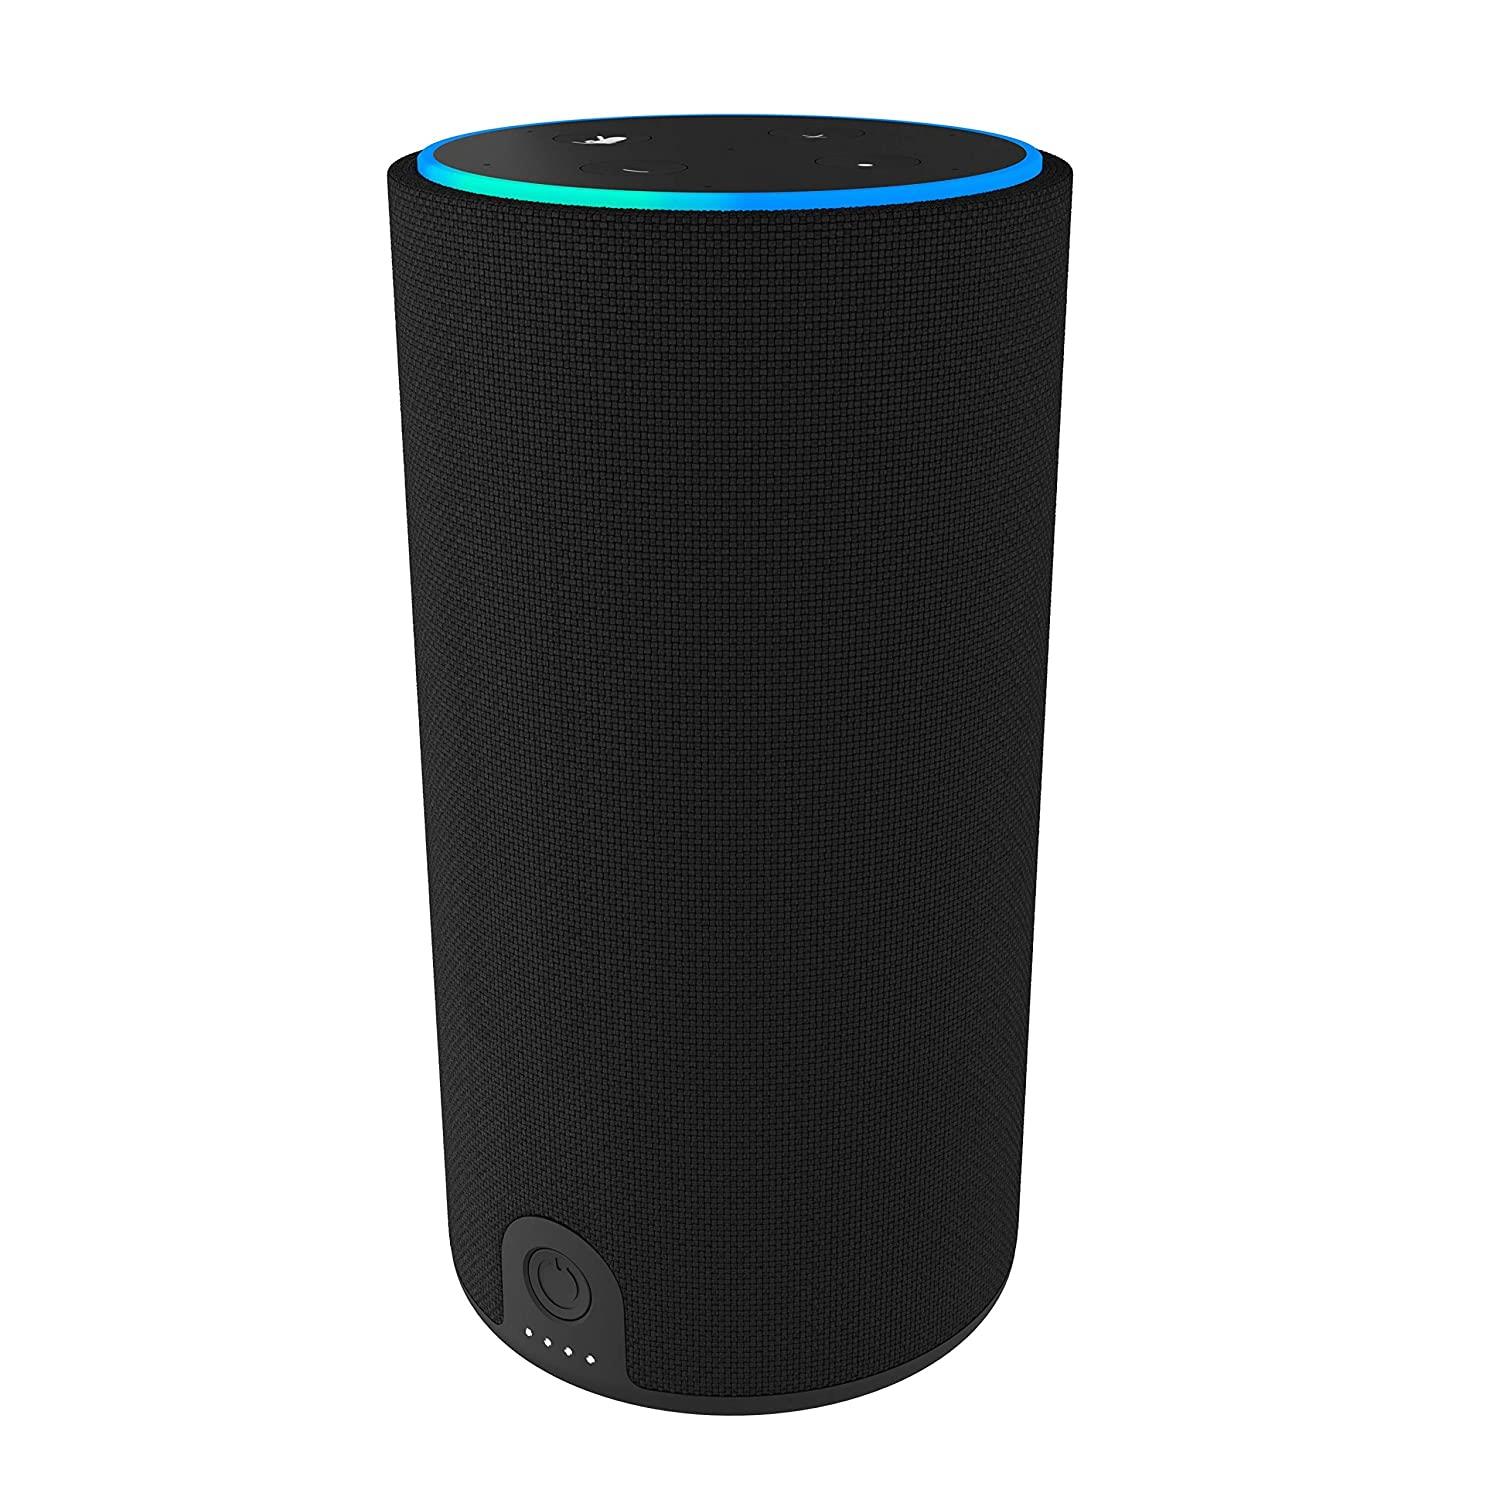 Echo (2nd Generation) with improved sound, powered by Dolby, and a new  design – Charcoal.